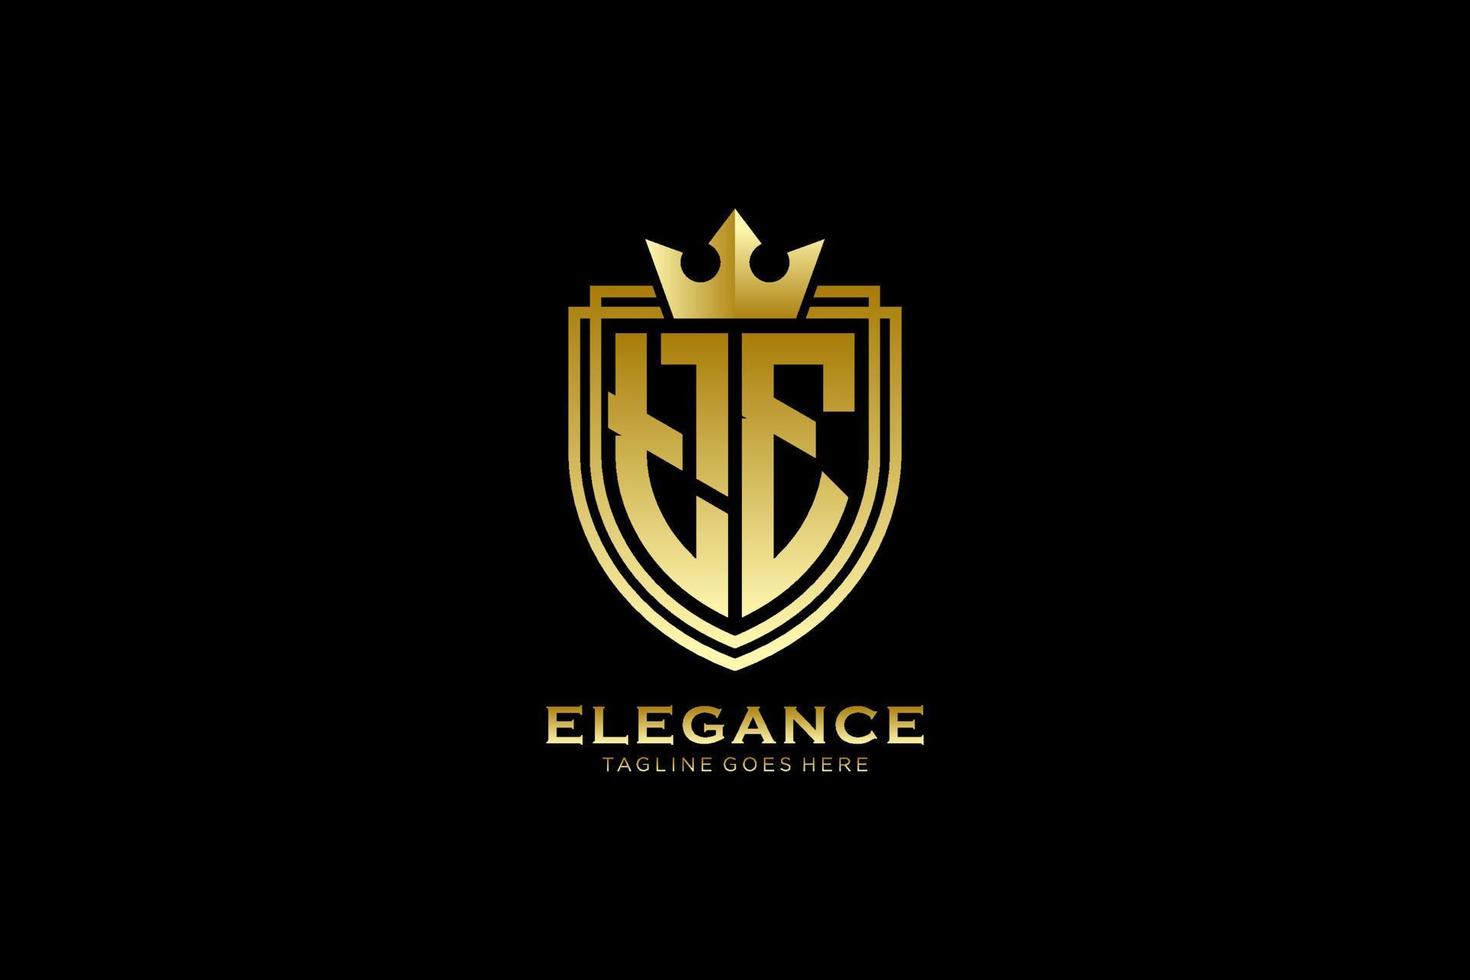 initial TE elegant luxury monogram logo or badge template with scrolls and royal crown - perfect for luxurious branding projects vector